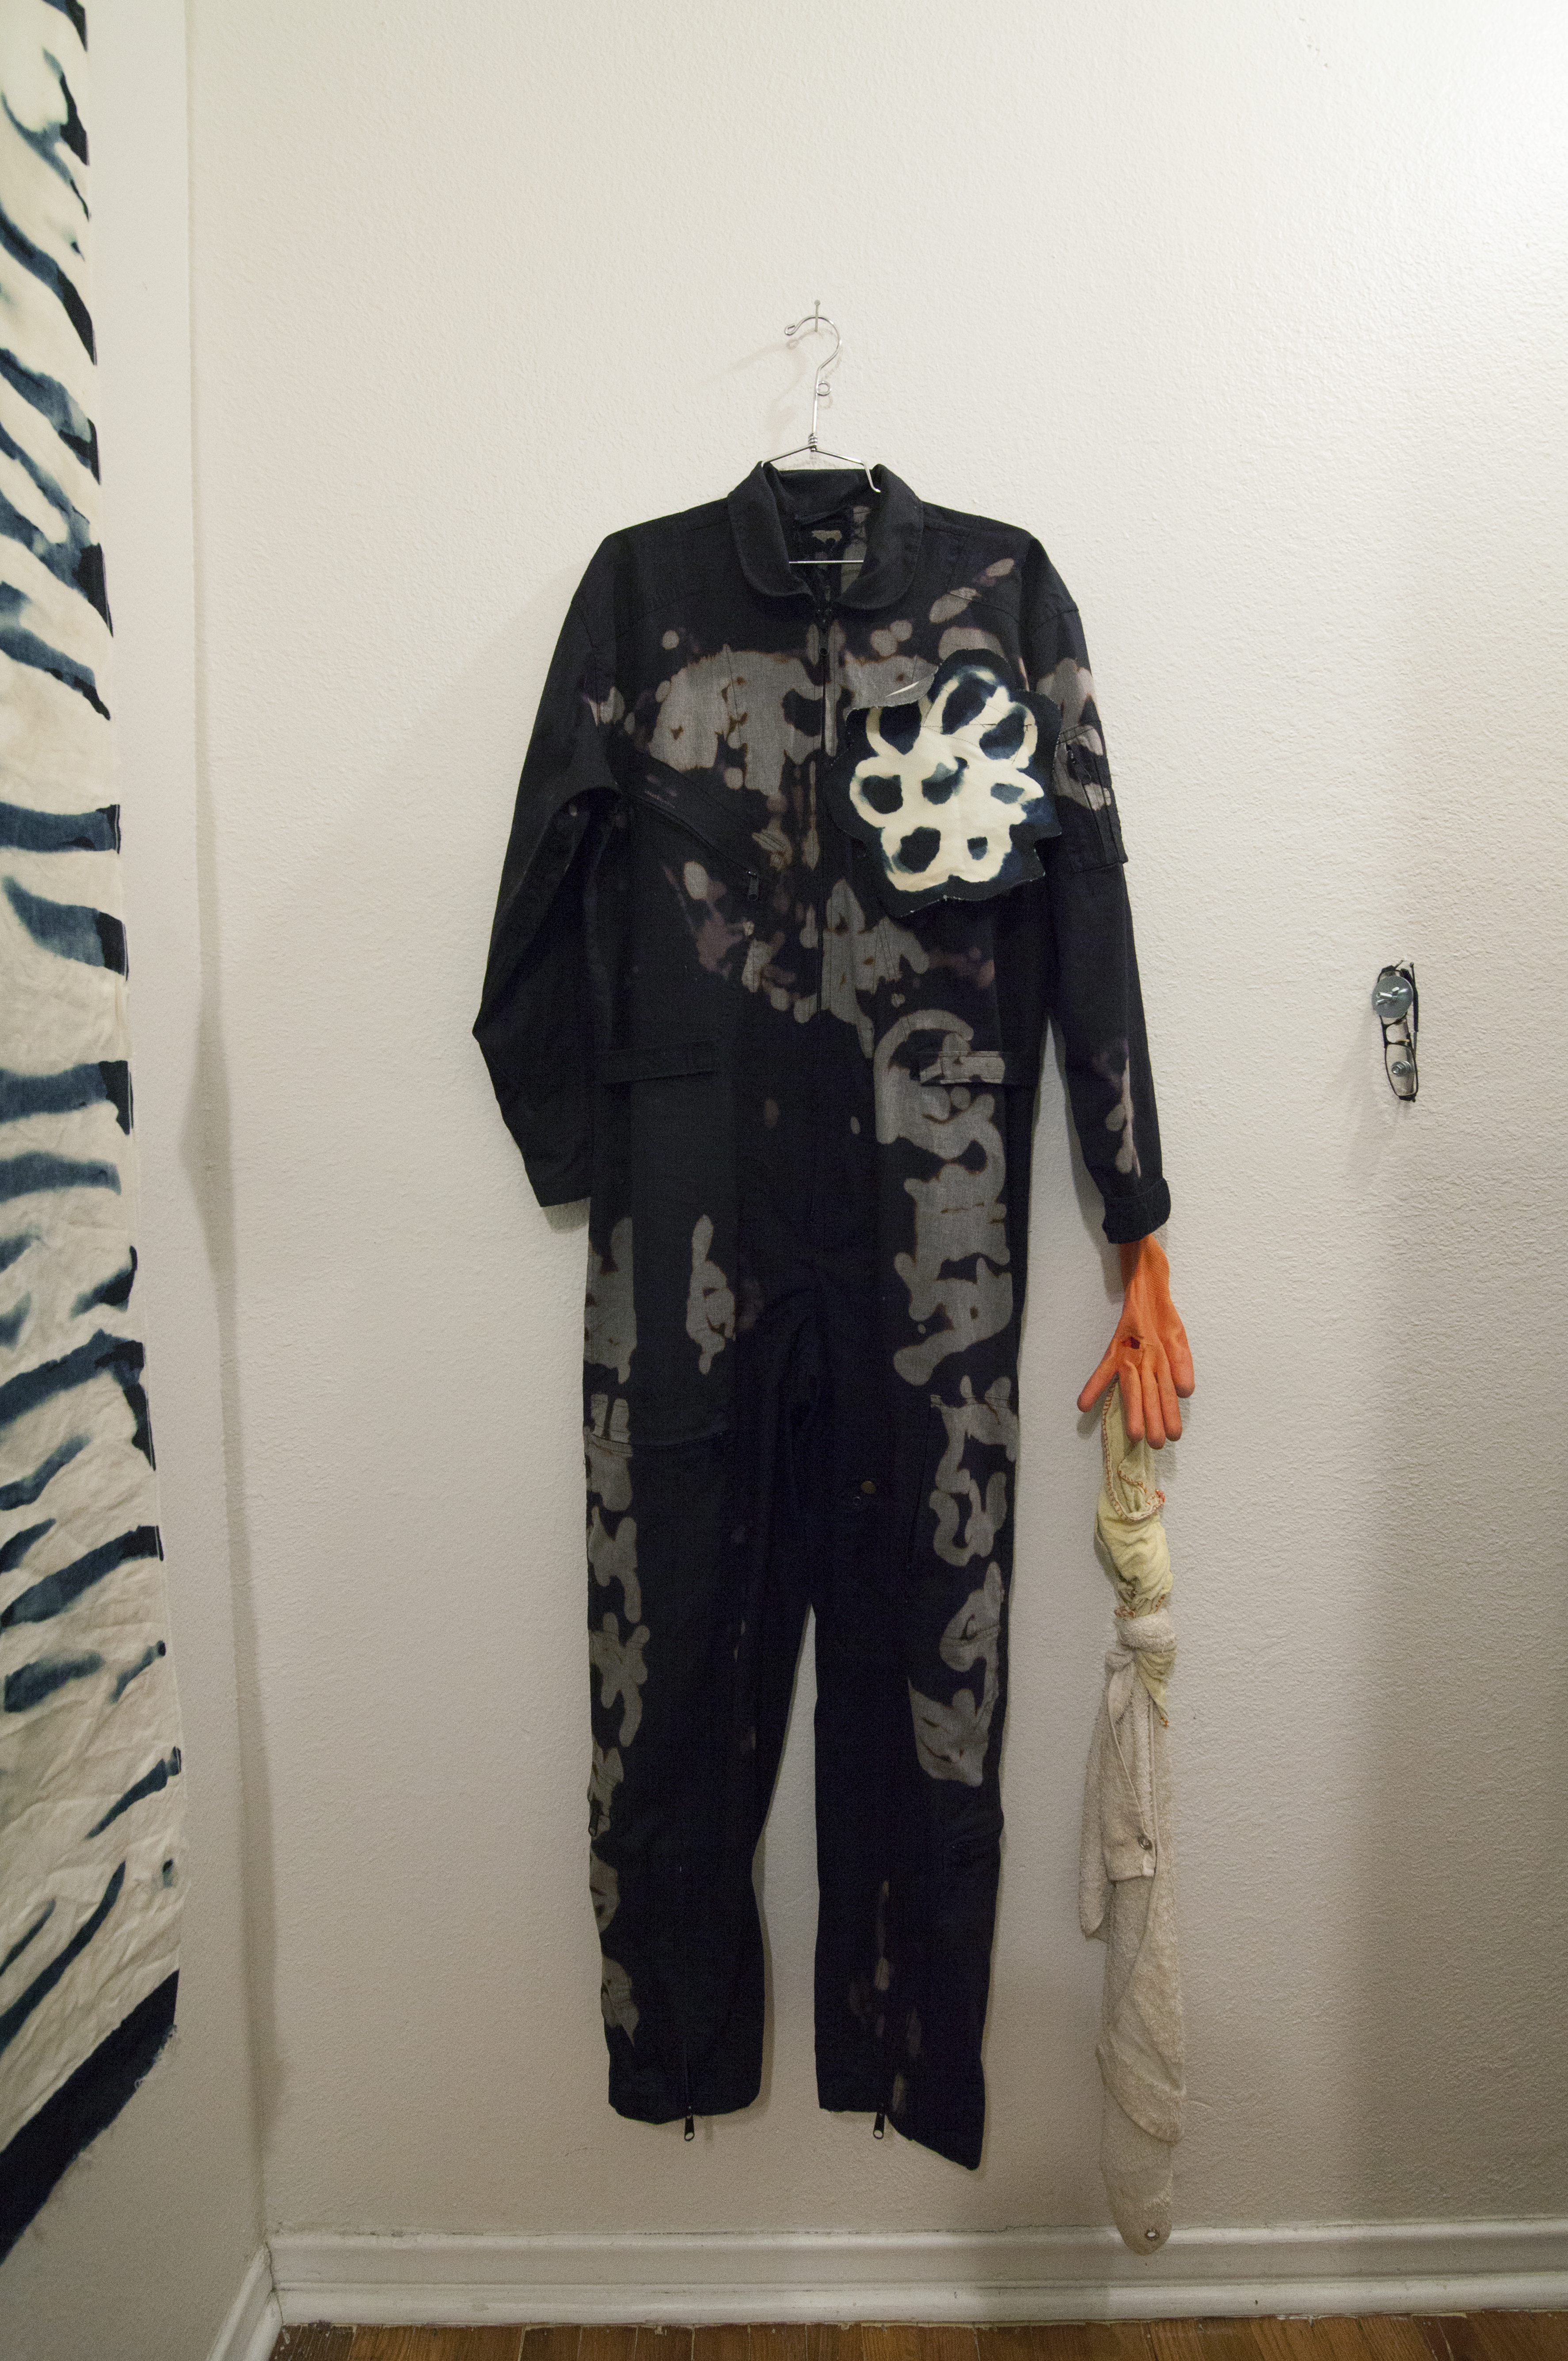 A dark jumpsuit with bleached patterns hung on a white wall